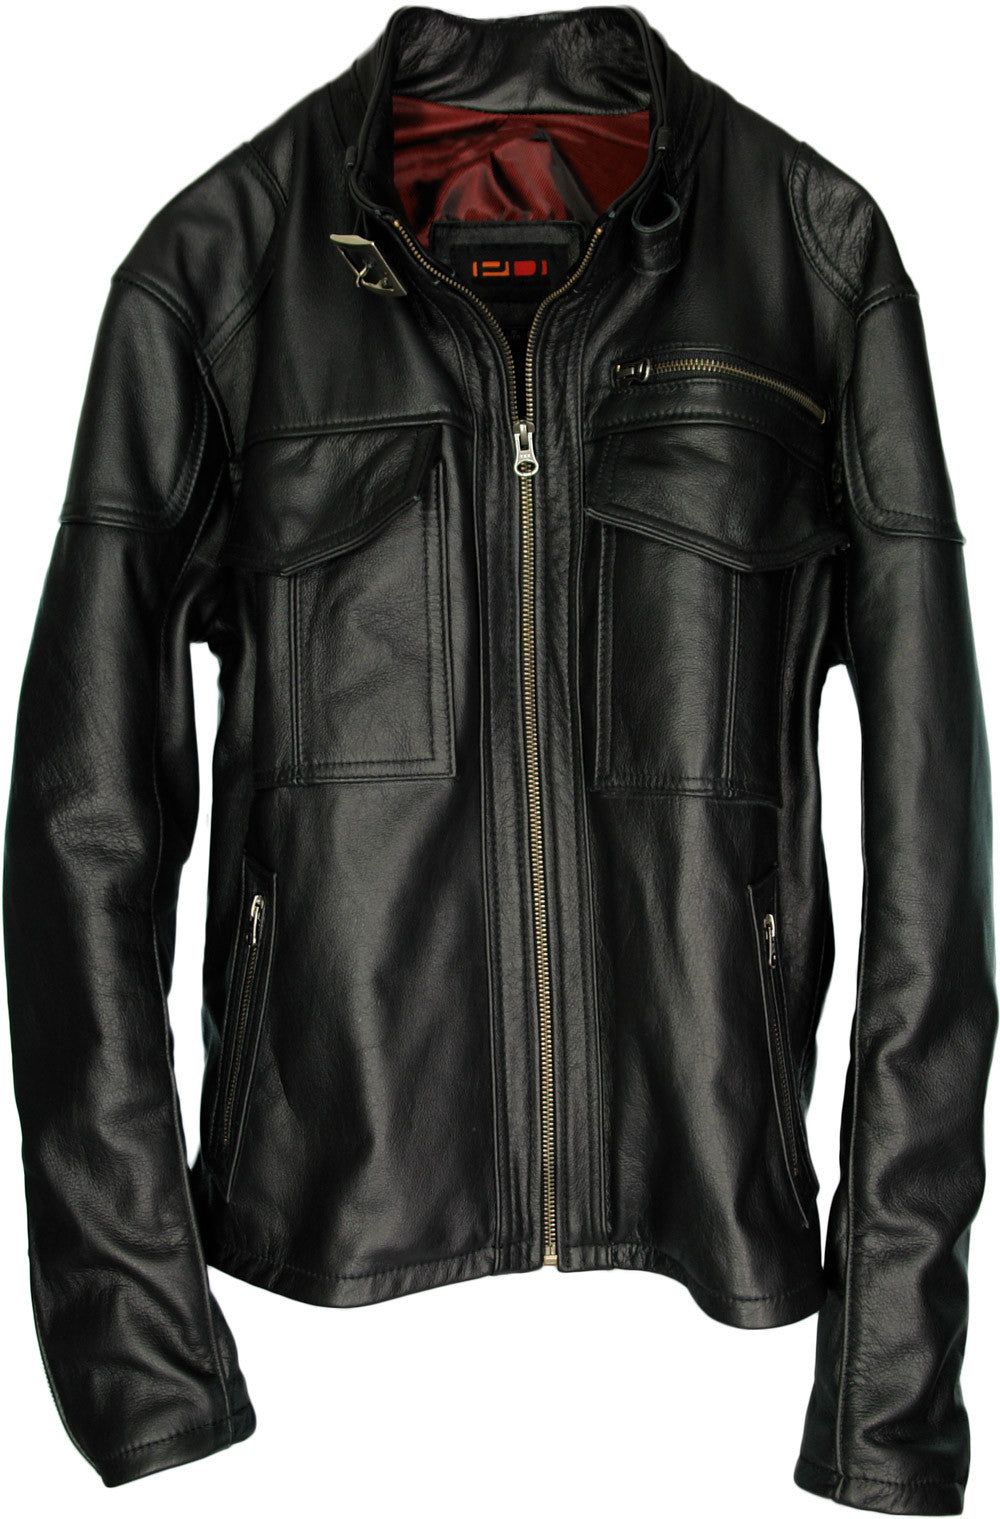 TRUE Leather Jacket Cafe Racer - In Black– PDCollection Leatherwear ...